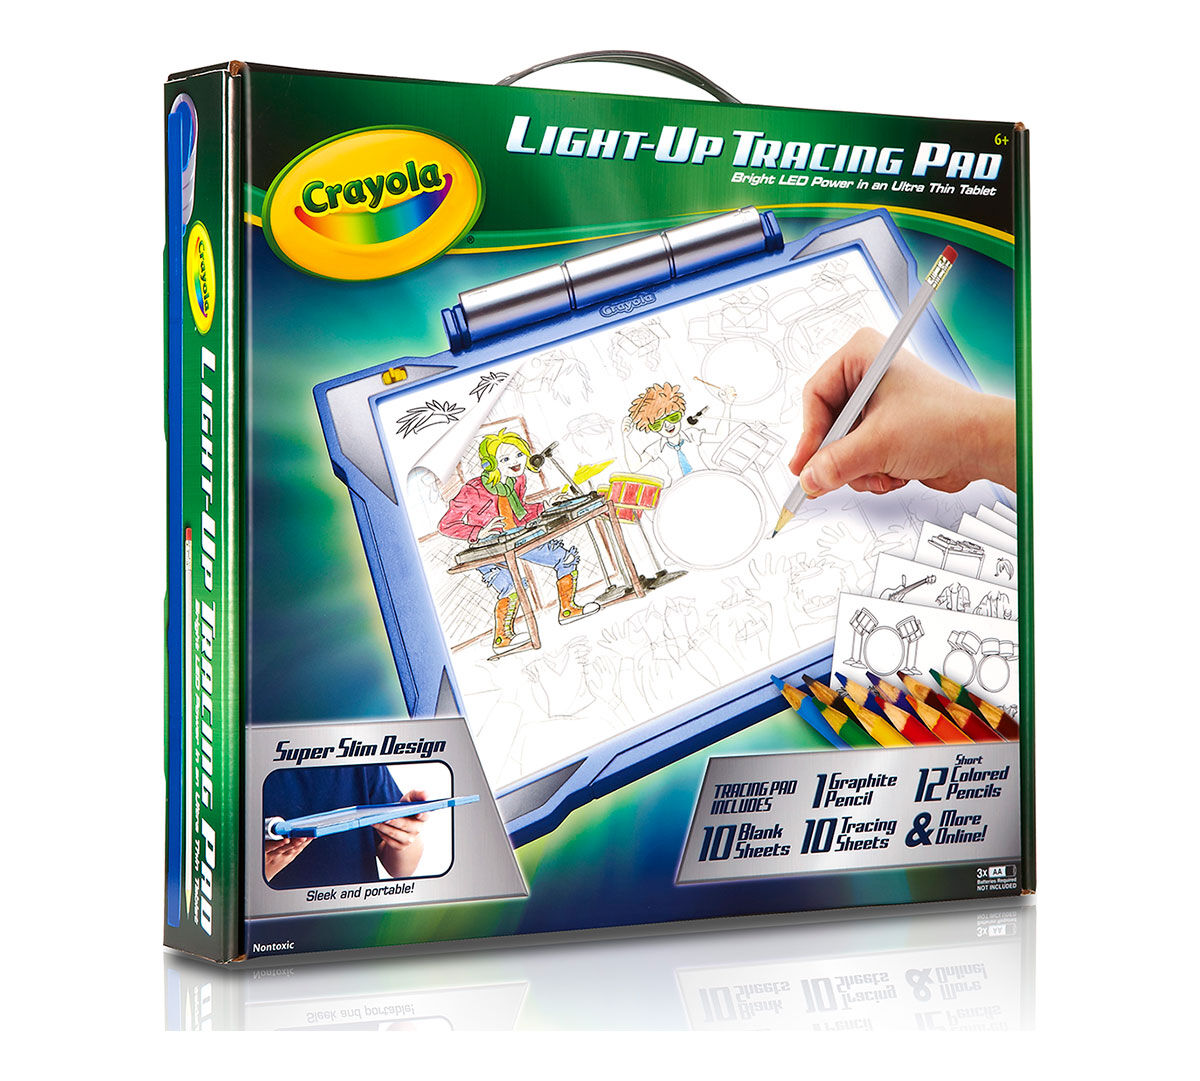 Crayola; Lightup Tracing Pad; Blue; Art Tool; Bright LEDs; Easy